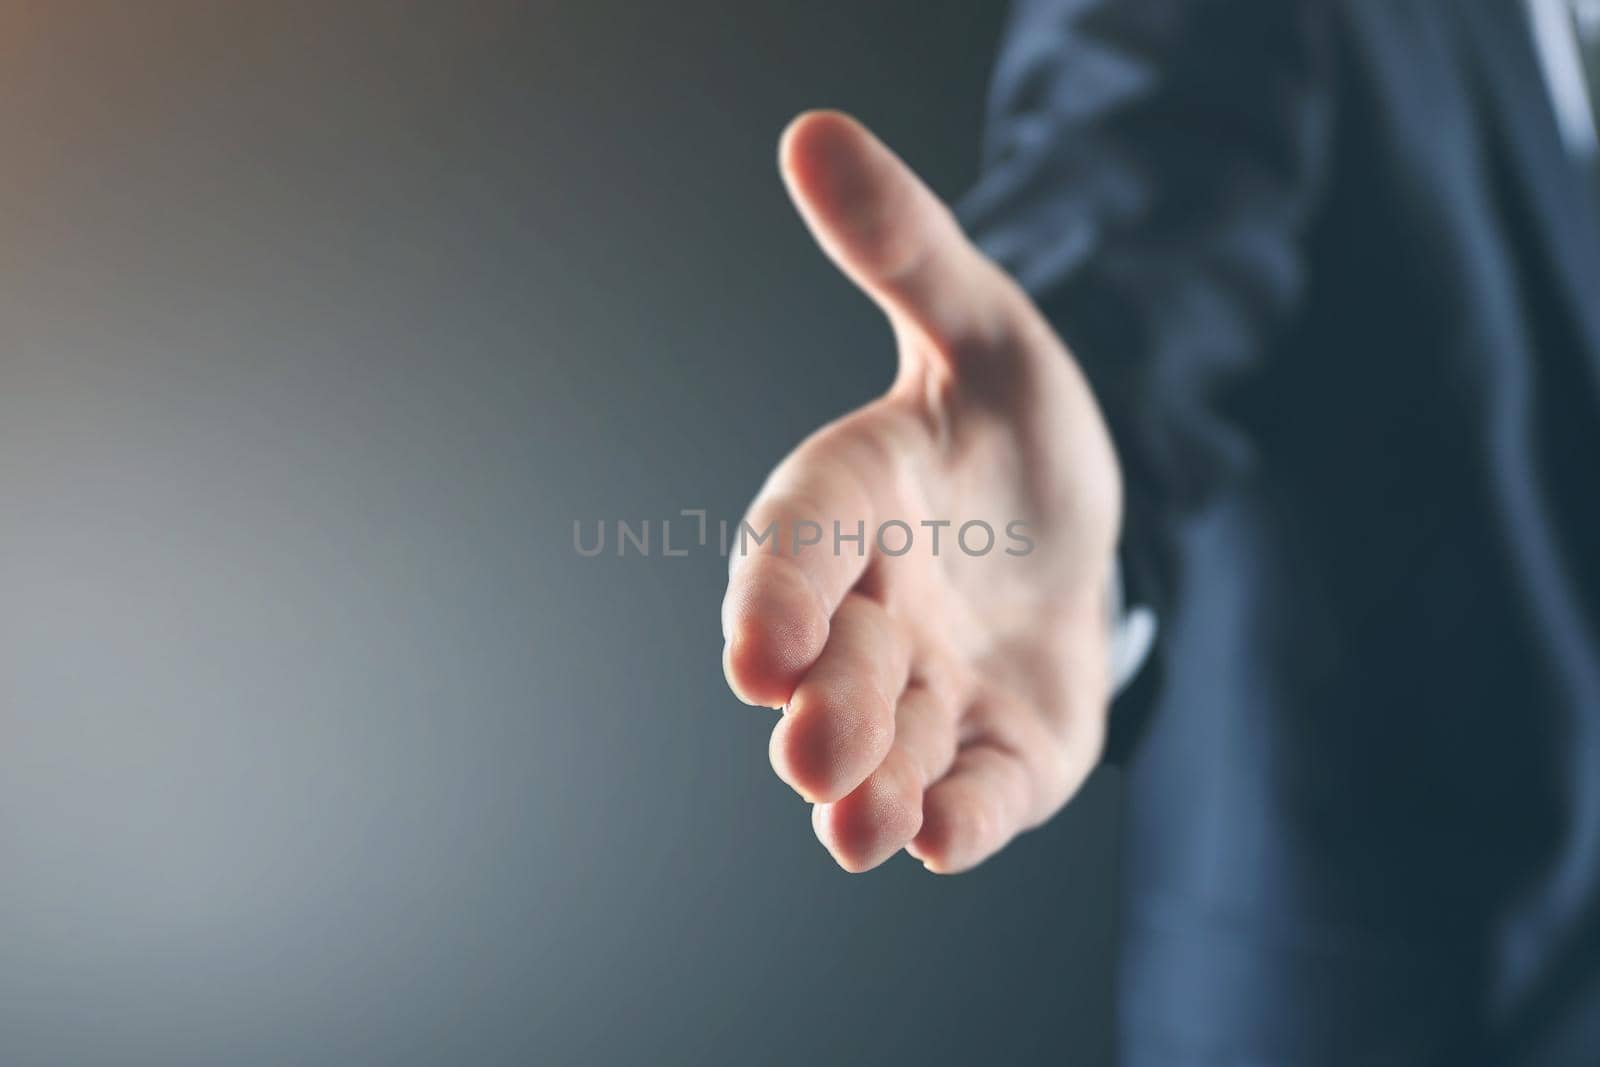 A business man with an open hand ready to seal a deal by SmartPhotoLab